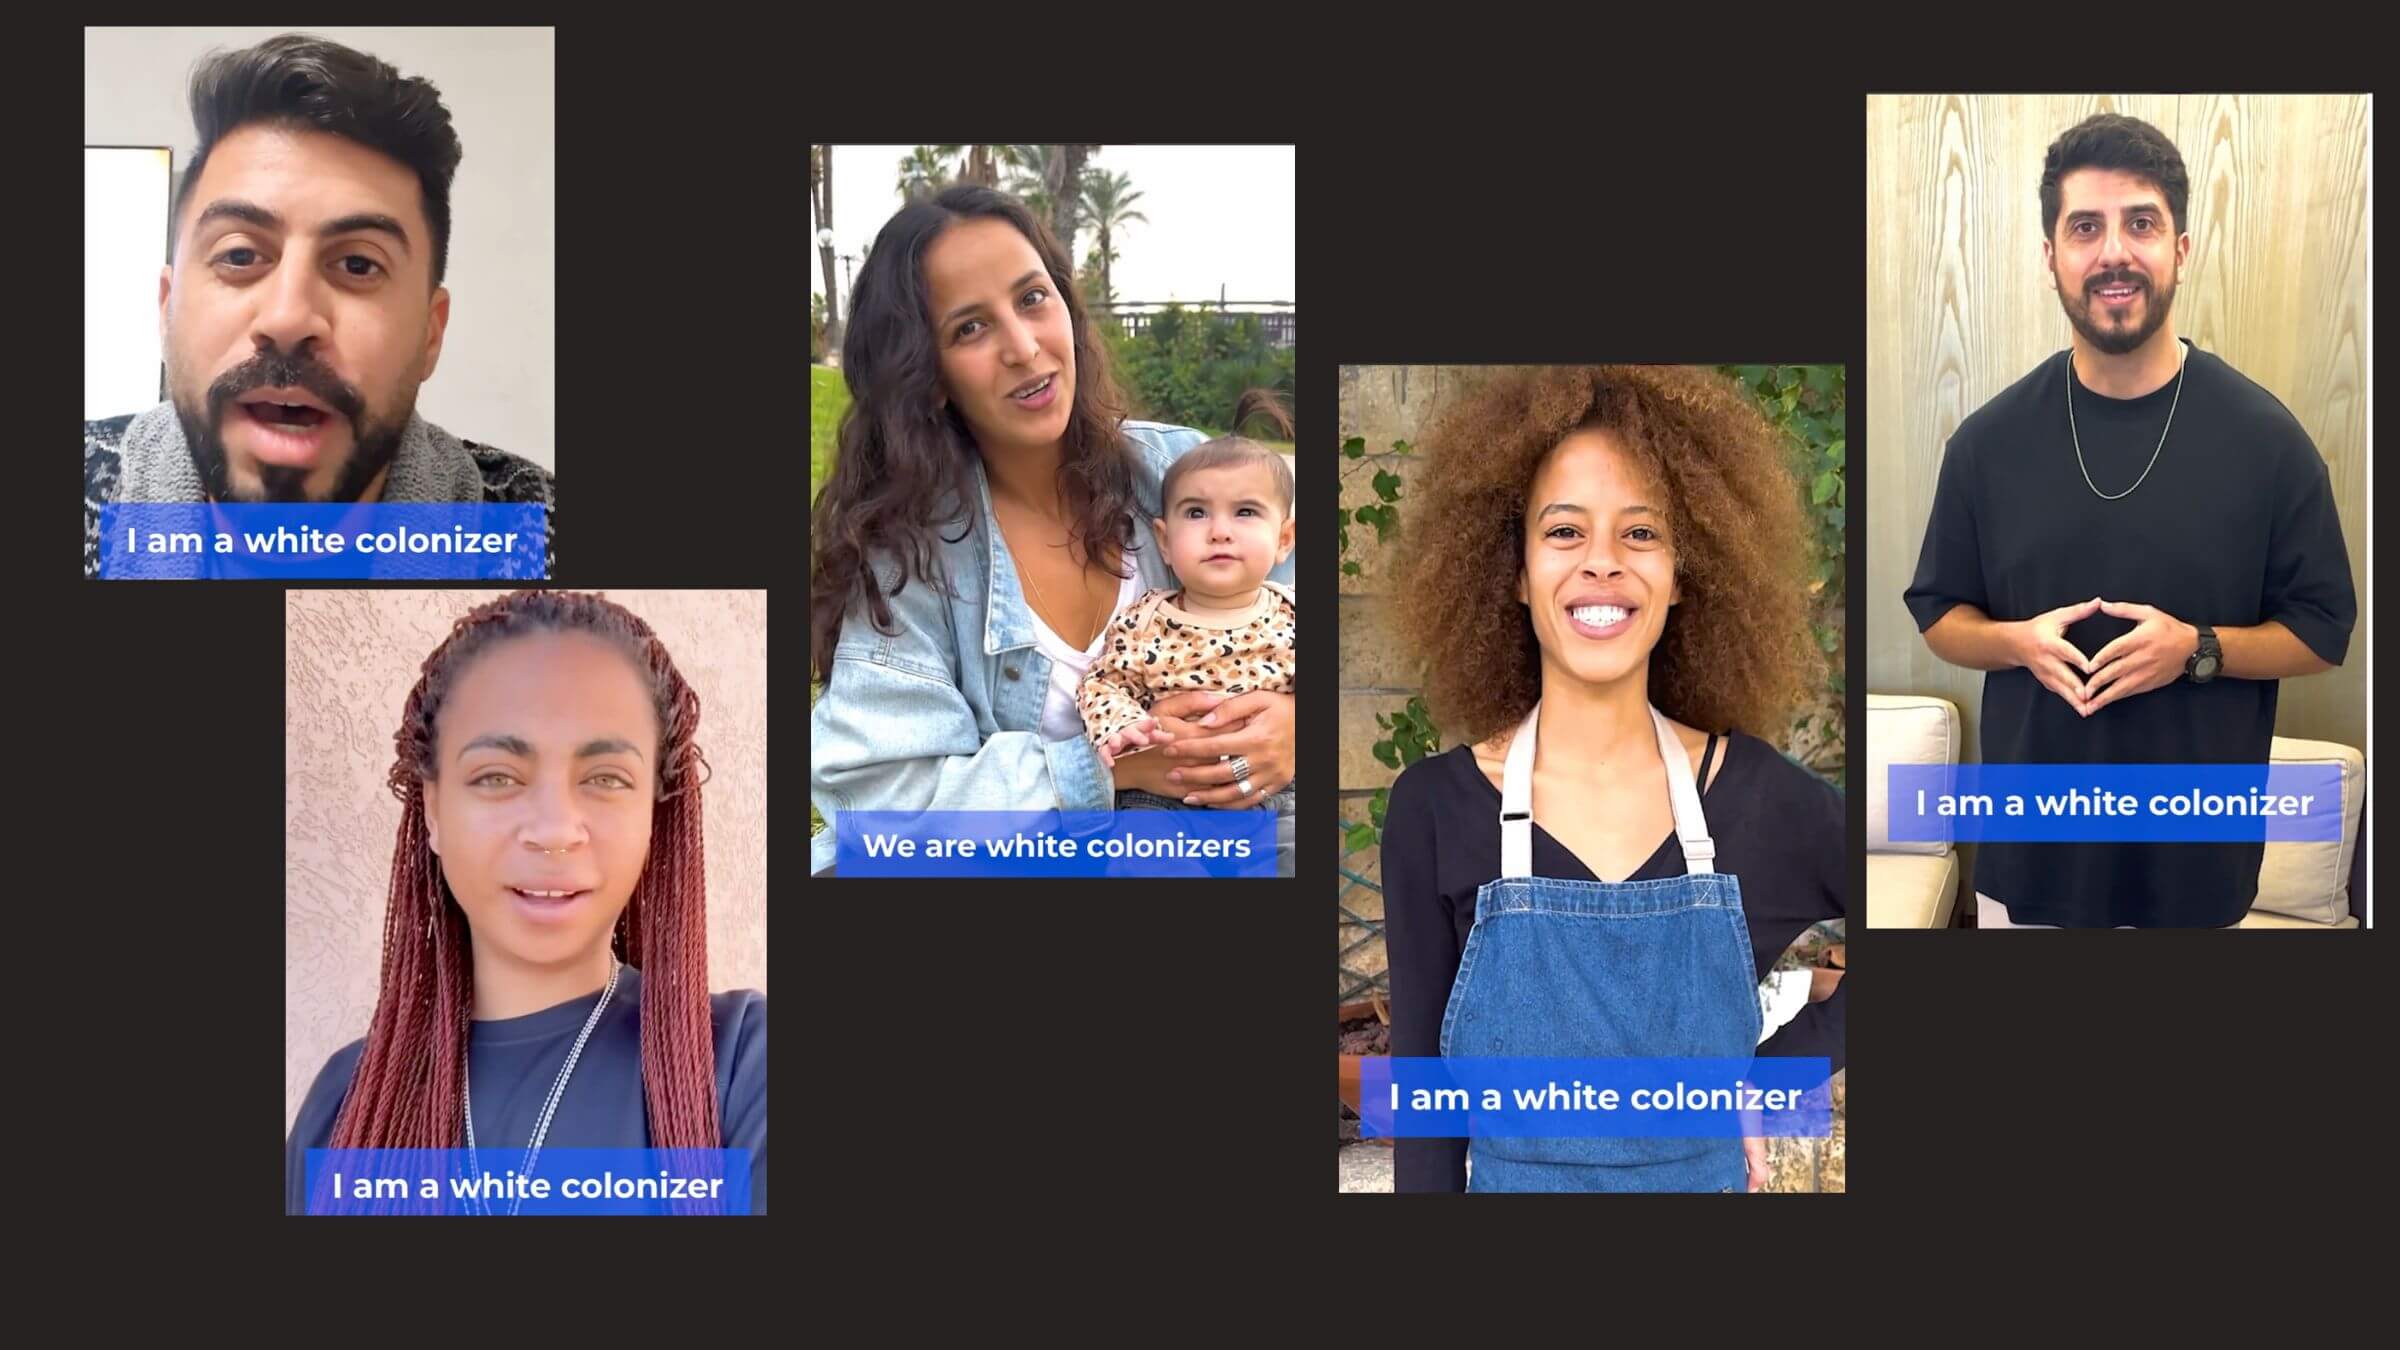 Israelis featured on the @israelsowhite Instagram account, which celebrates diverse Jewish heritage and pokes fun at claims that Israelis are "white colonizers."